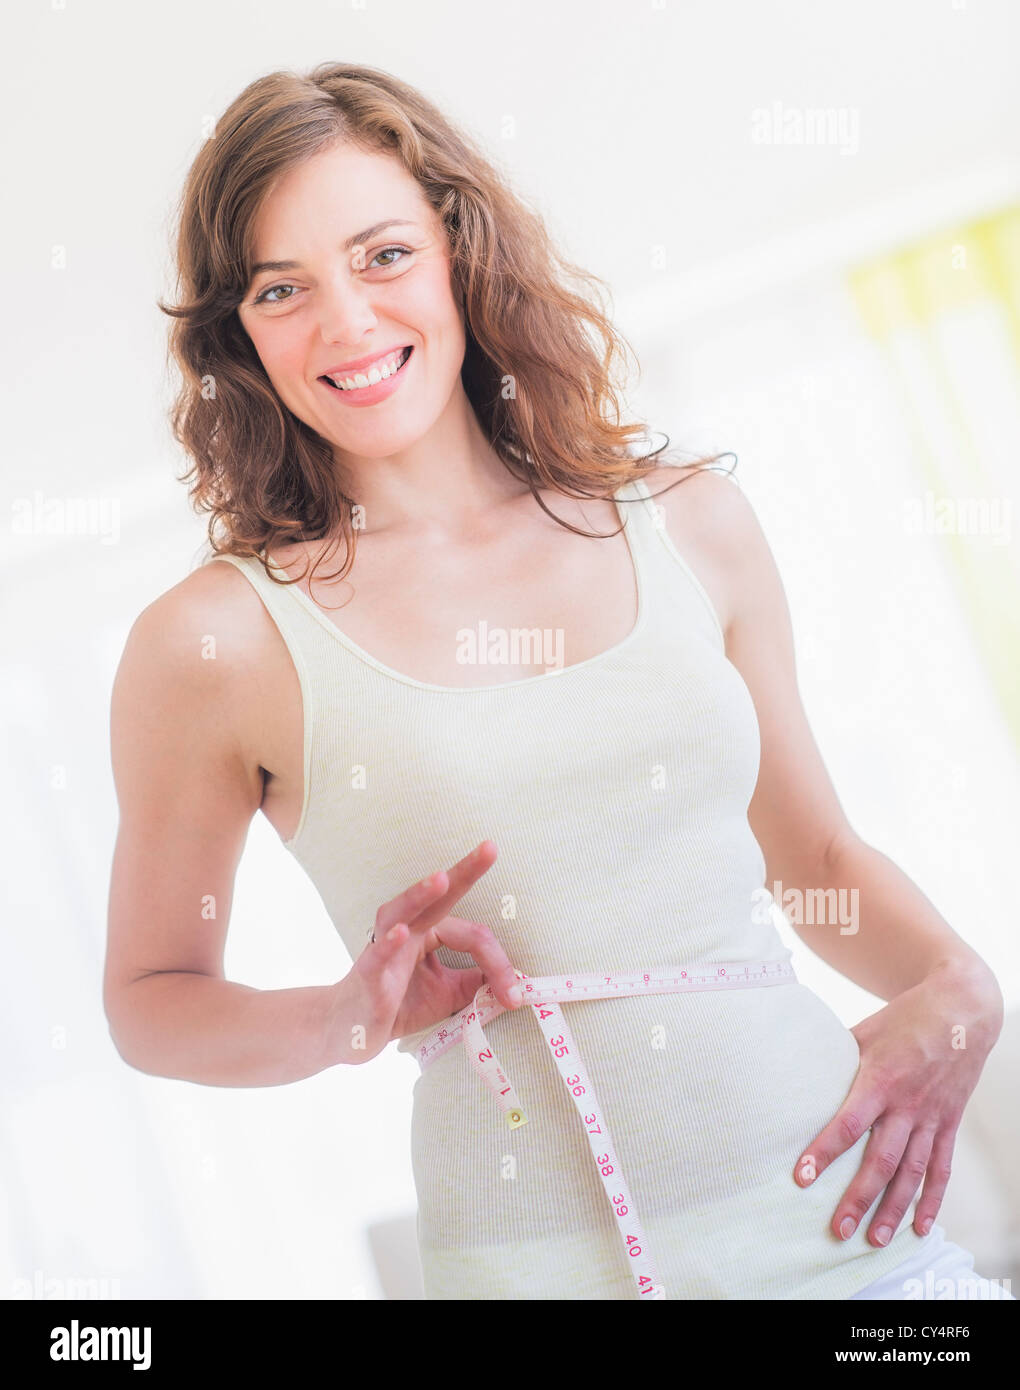 Surprised excess weight caucasian woman wrap measure tape around her waist.  High quality photo image. Stock Photo by ©kazzakova 558018968